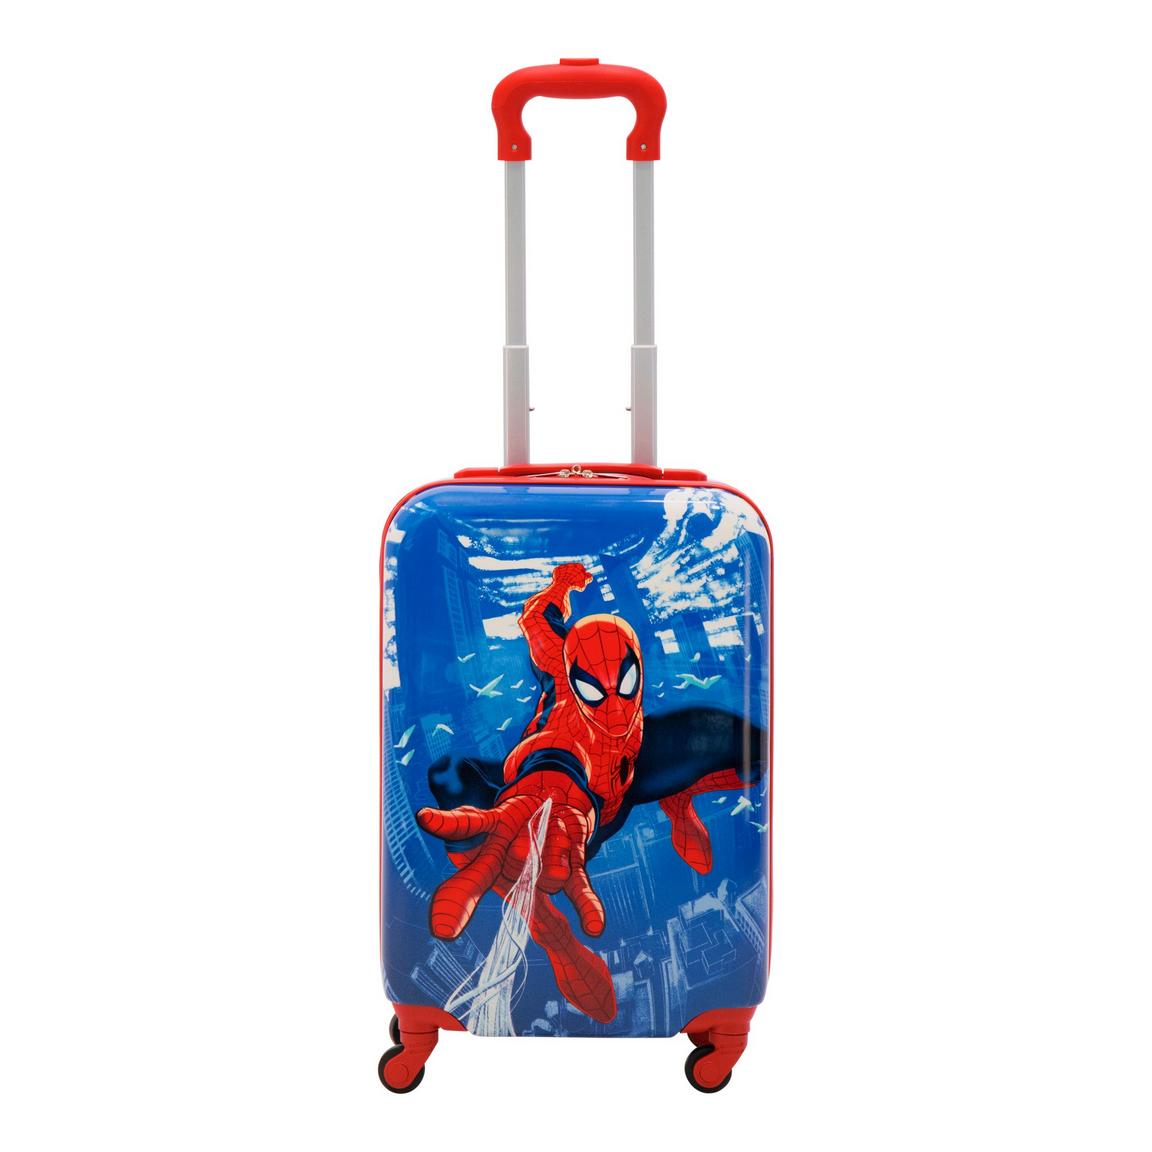 Concept One Marvel Ful Spiderman Web Slinging Kids 21-in Hard-Sided Carry-On Luggage